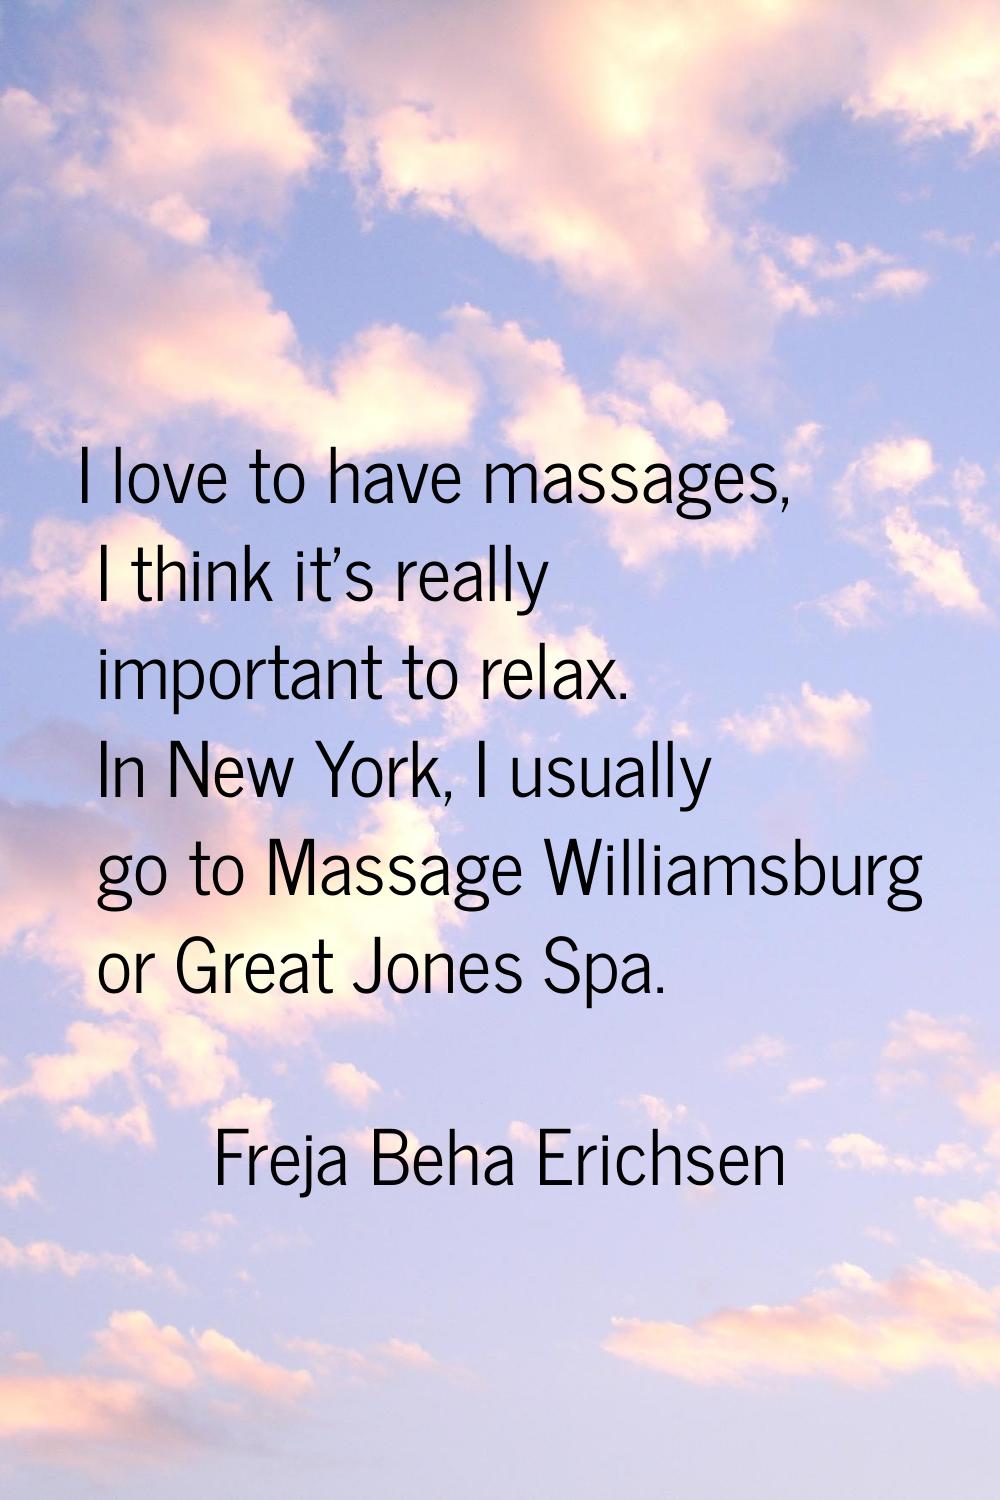 I love to have massages, I think it's really important to relax. In New York, I usually go to Massa